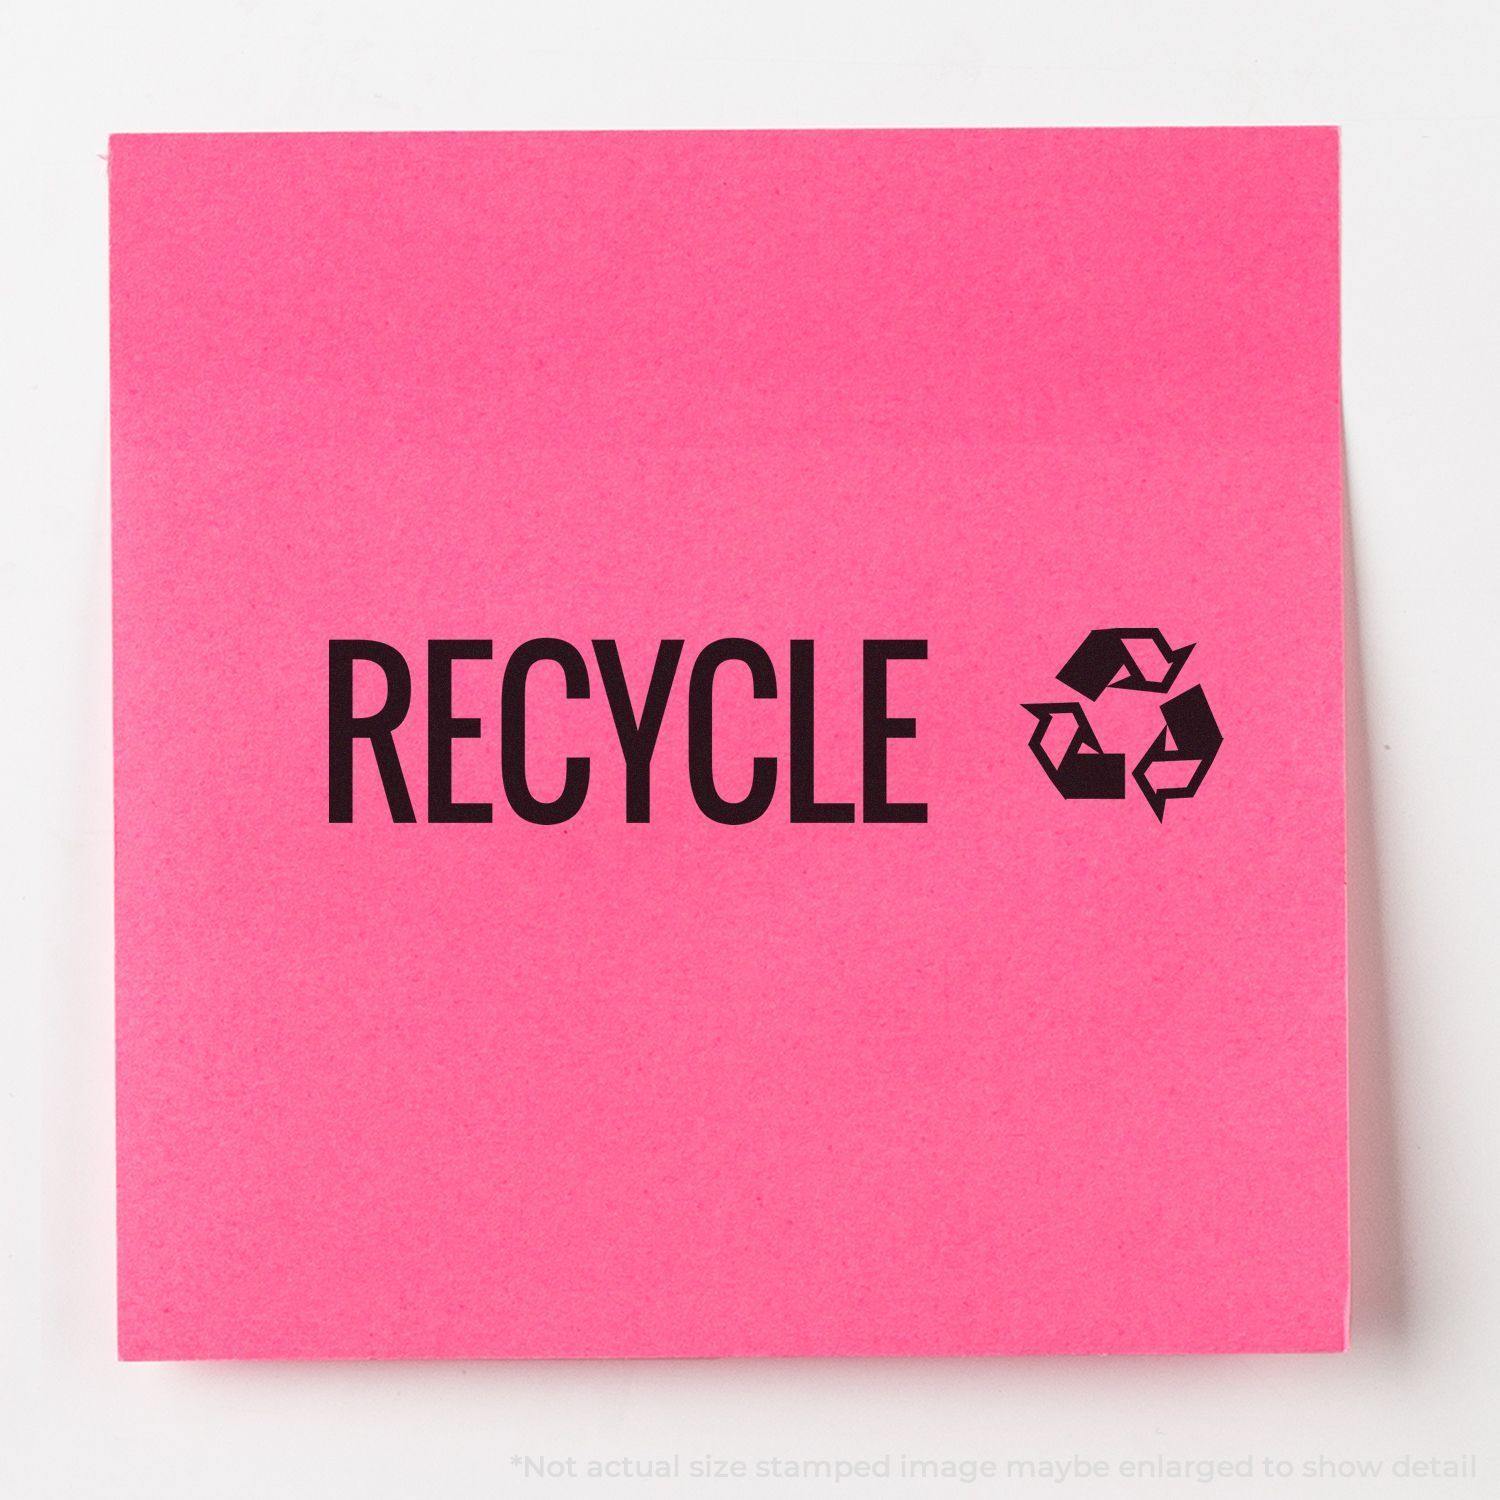 A stock office rubber stamp with a stamped image showing how the text "RECYCLE" with the recycling icon on the right side is displayed after stamping.